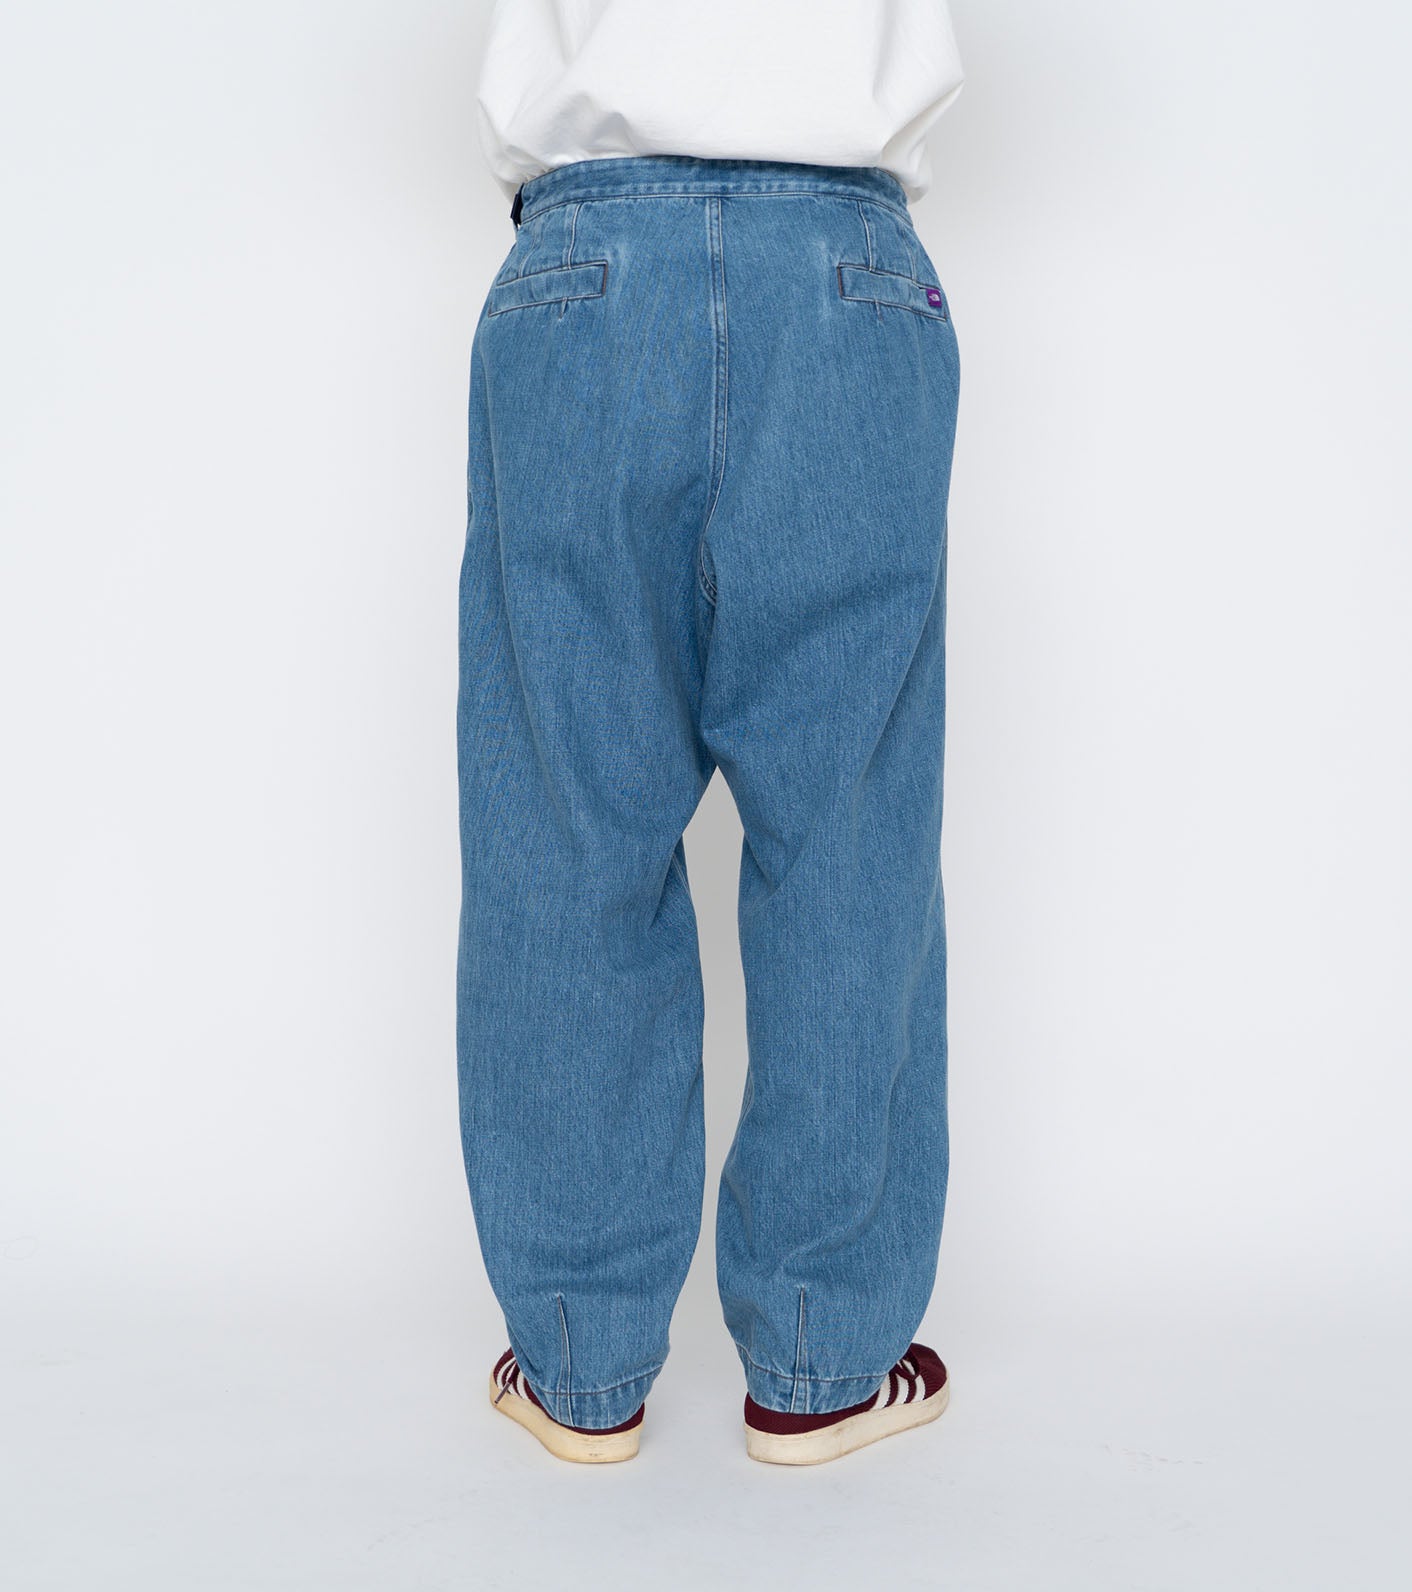 THE NORTH FACE PURPLE LABEL Denim Wide Tapered Field Pants